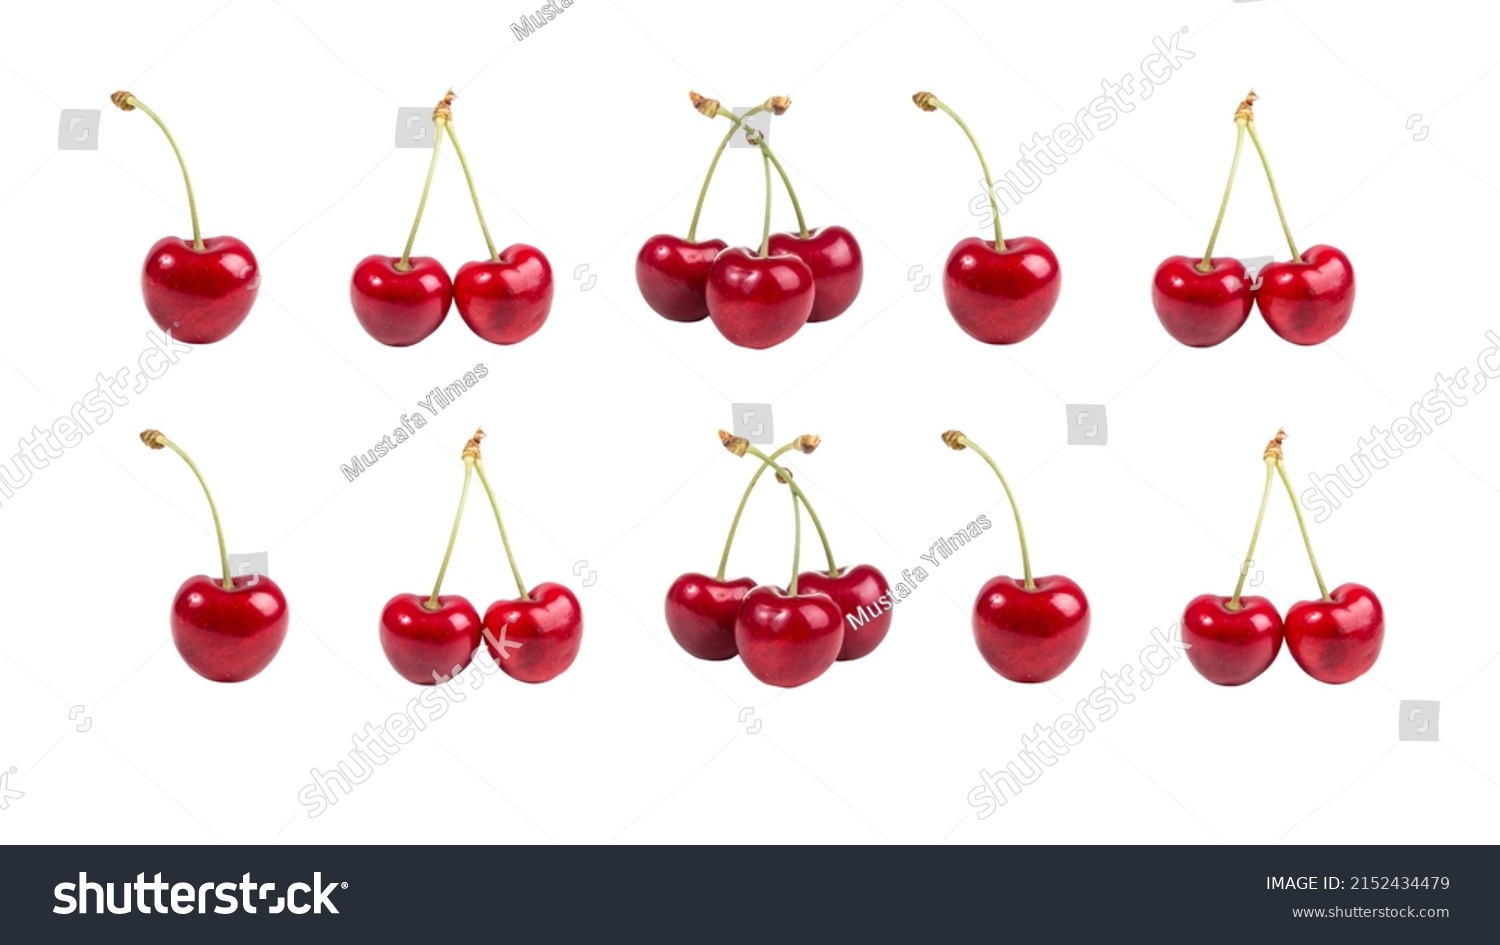 Cherries over white background, different quantities of cherries, isolated cherry, grouped cherries, isolated photo #2152434479